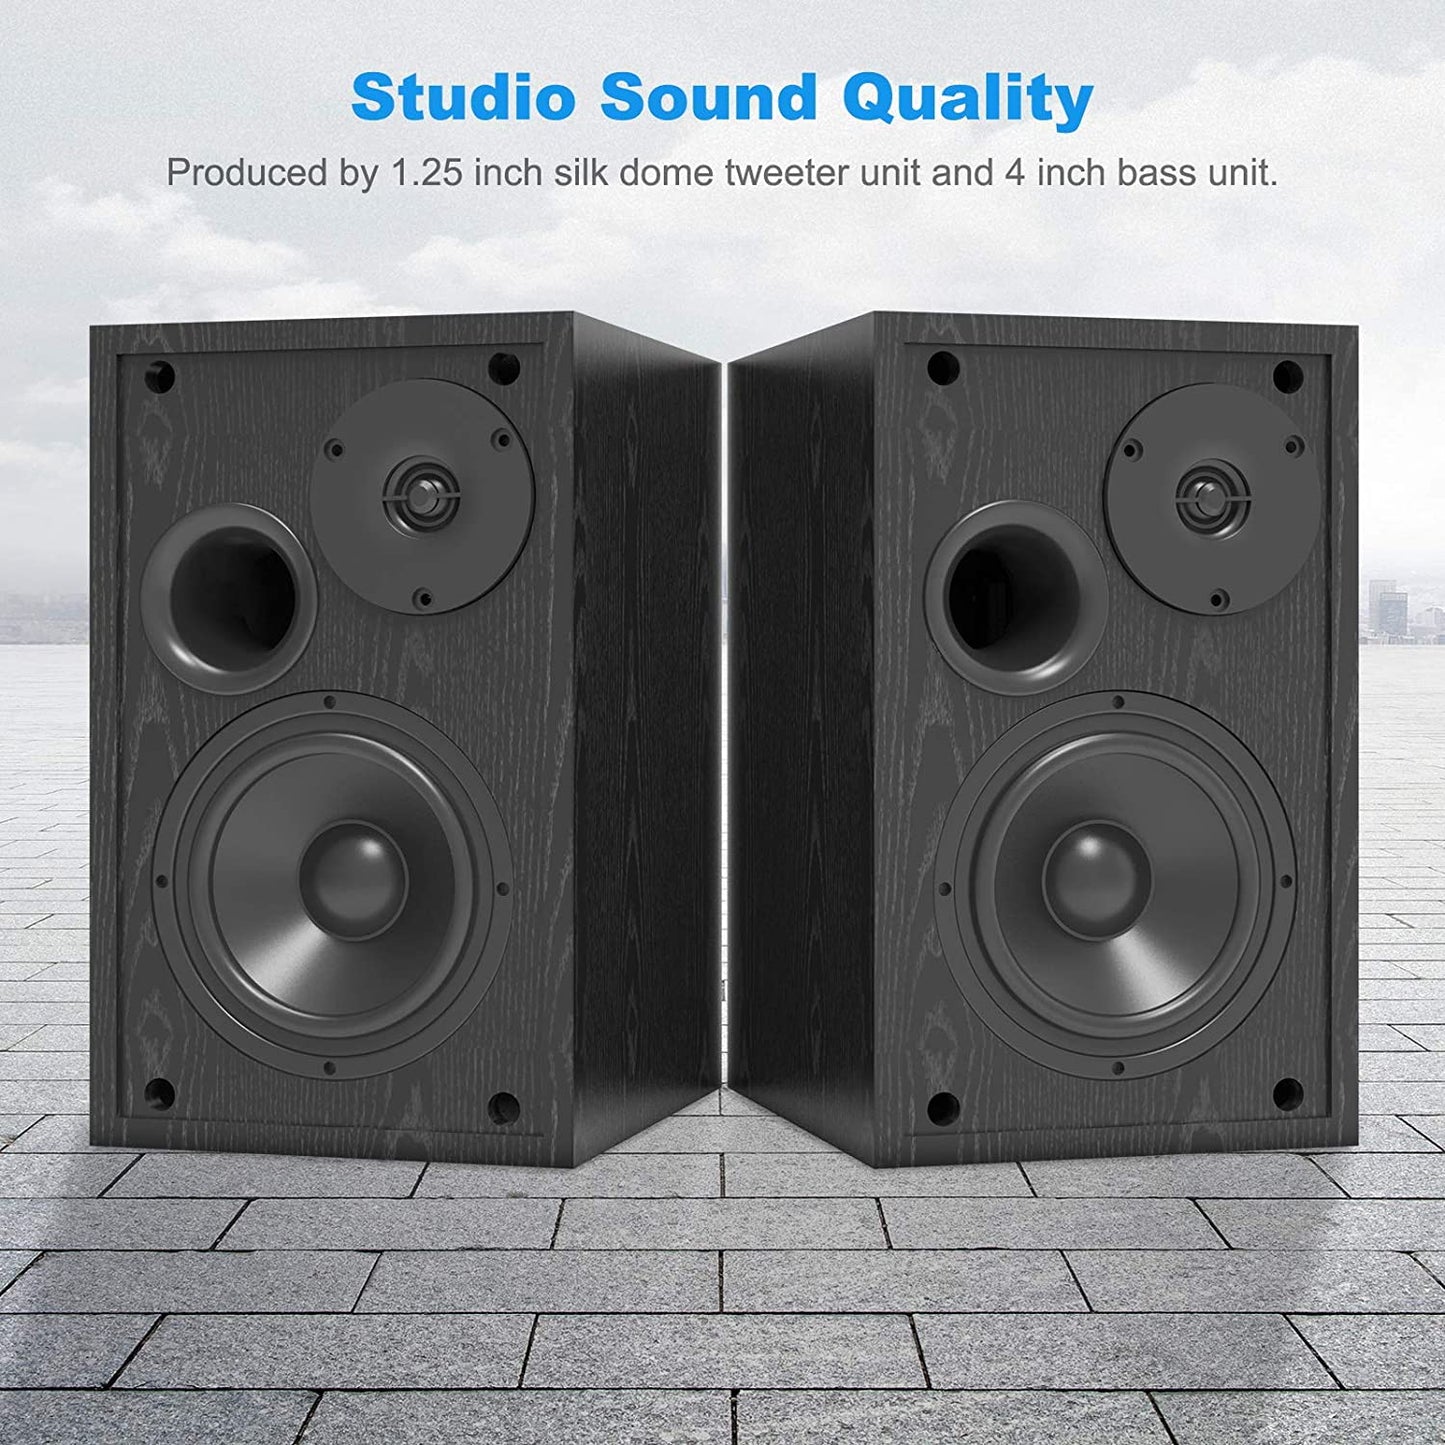 High-Quality 50W Powered Bookshelf Speakers with Bluetooth 5.0, Bass Adjustable, Ideal for TV, Computer, Phone, Record Player, and Home Studio Use